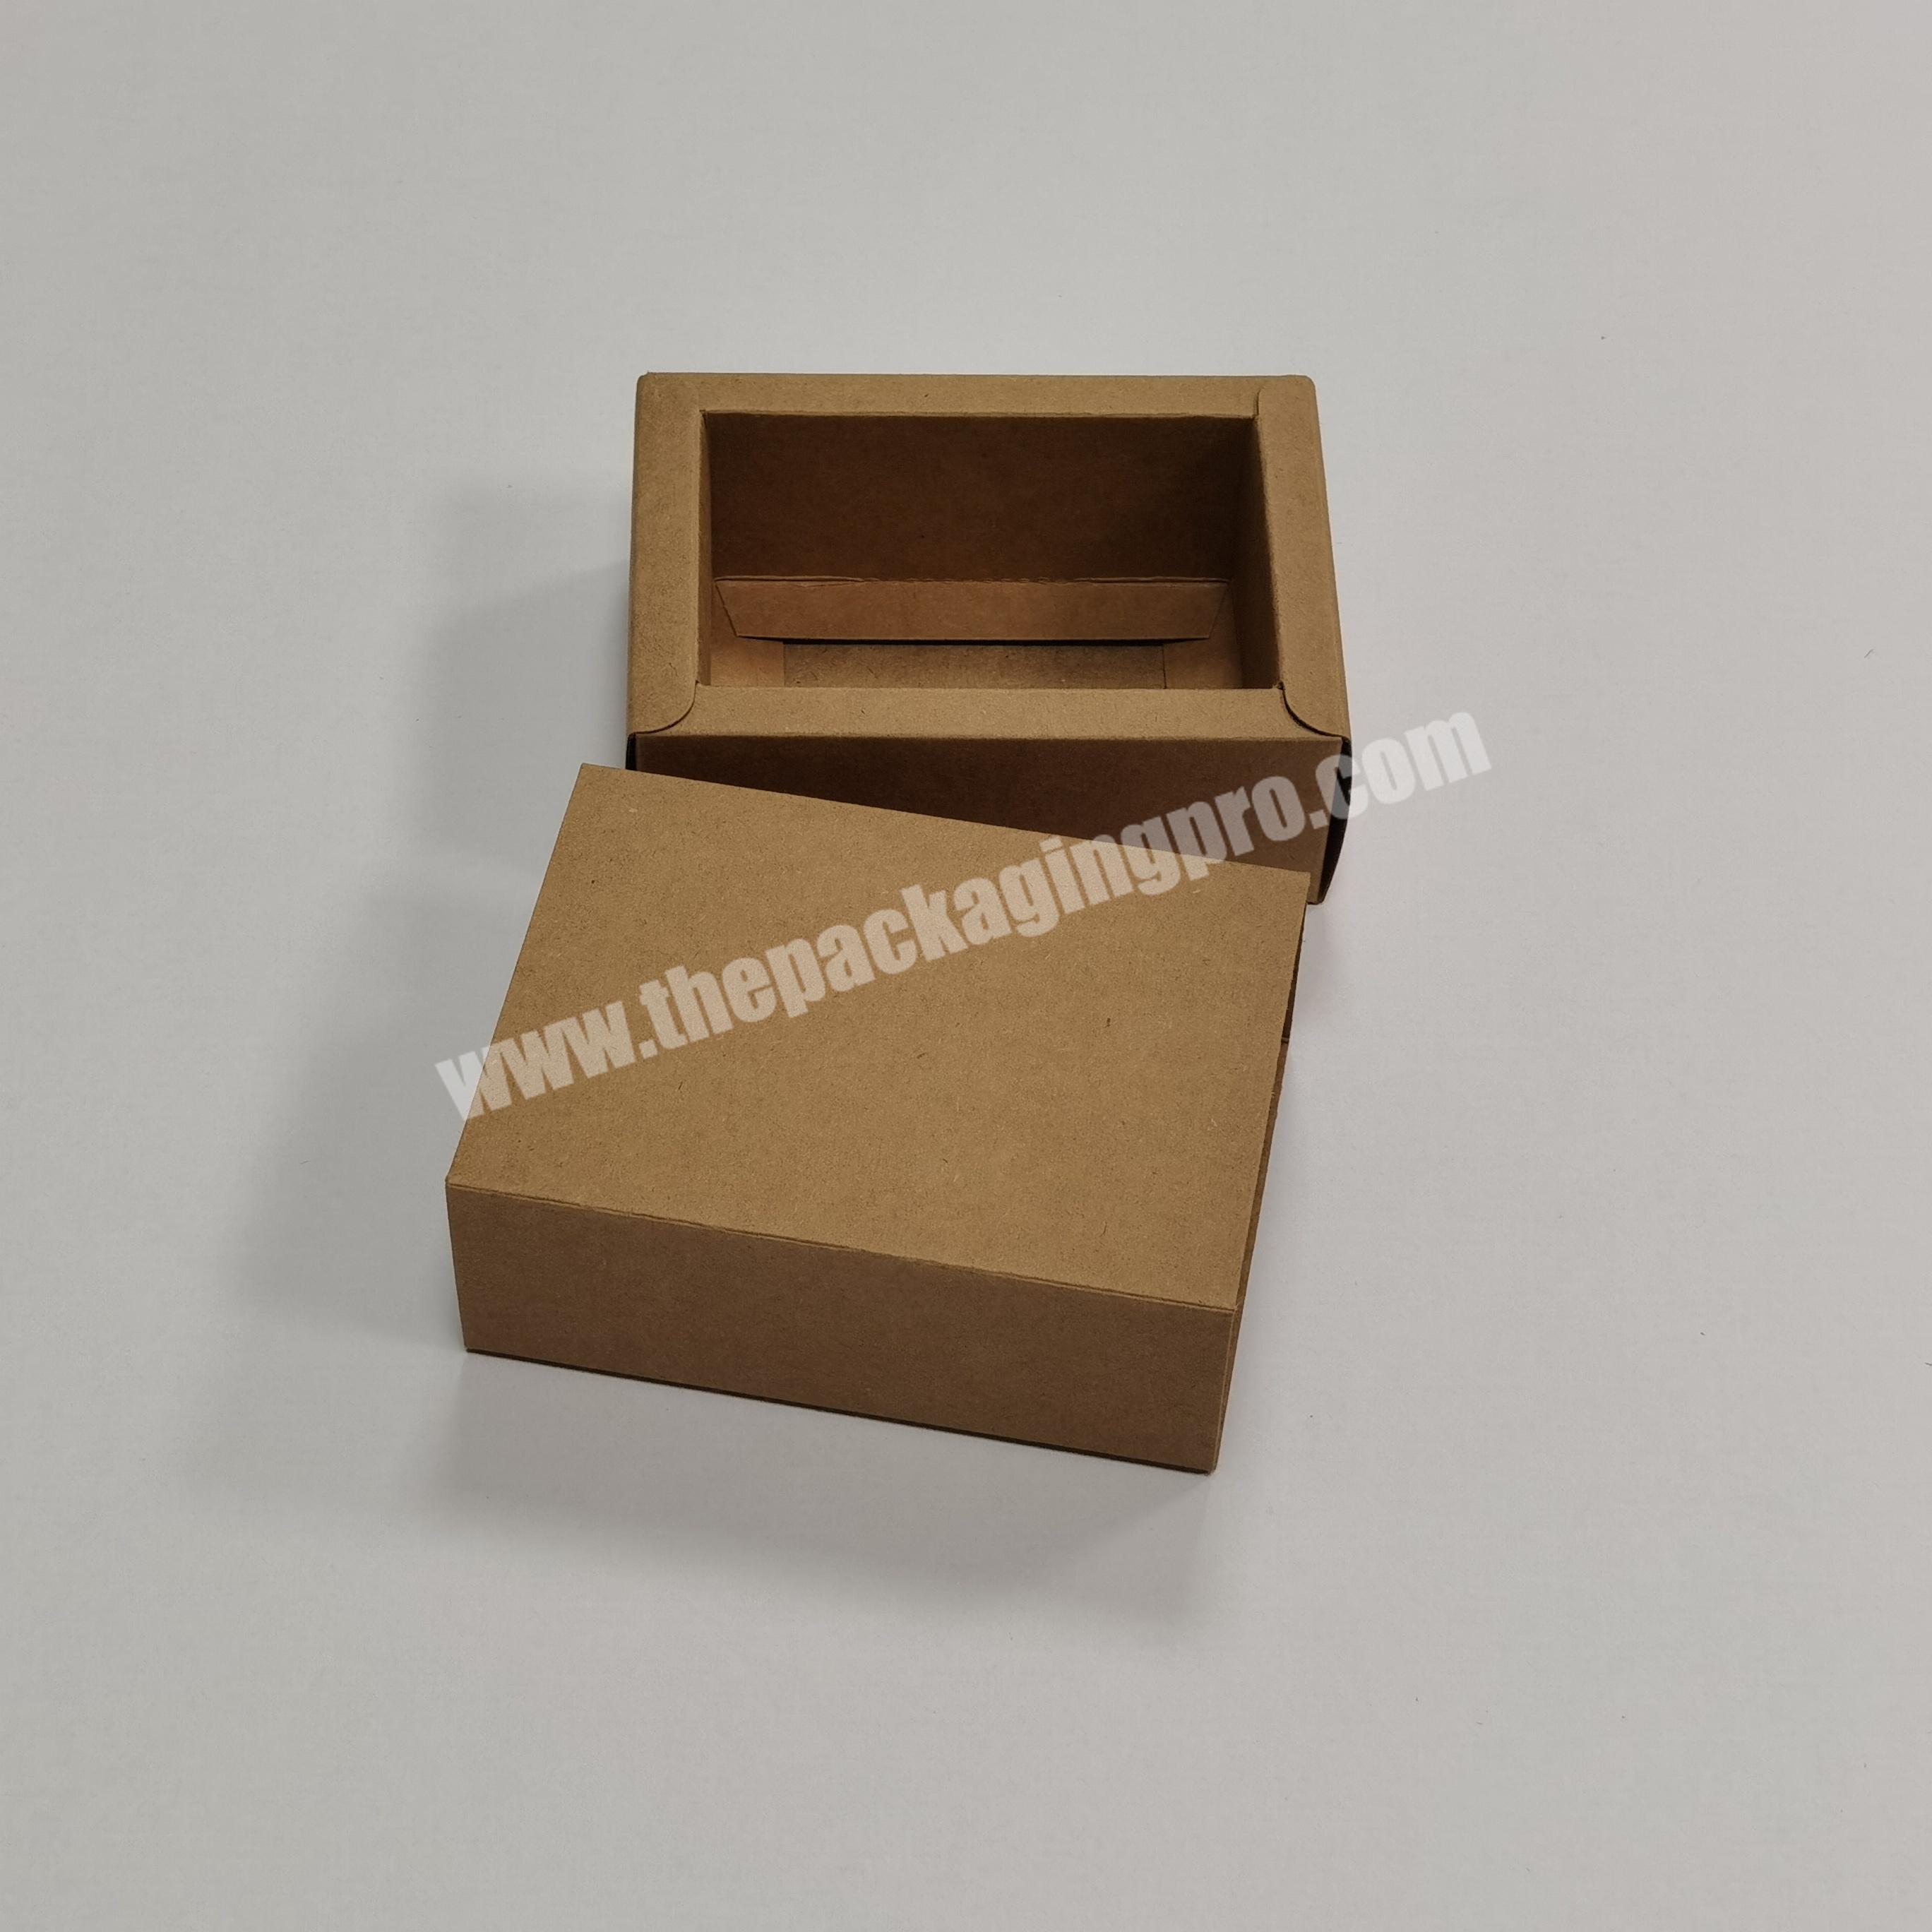 Factory Rectangle Small Brown Kraft Boxes Heavy Duty Paper Gift Box with Drawer for Gifts Packaging Socks Jewelry